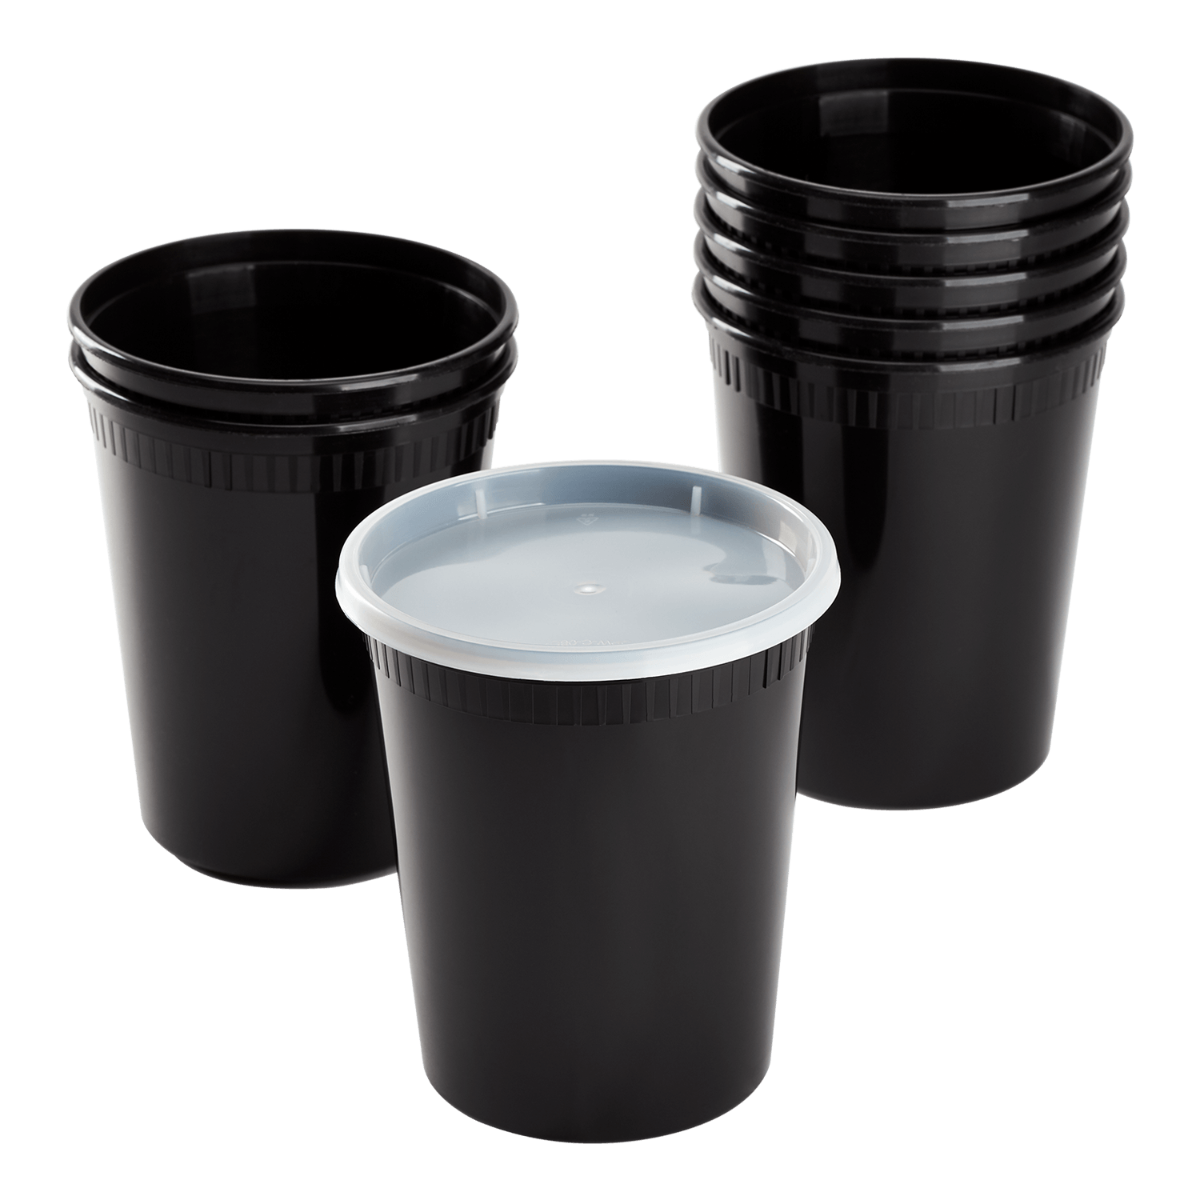 Wholesale 32 oz Black PP Injection Molded Round Deli Containers with L 